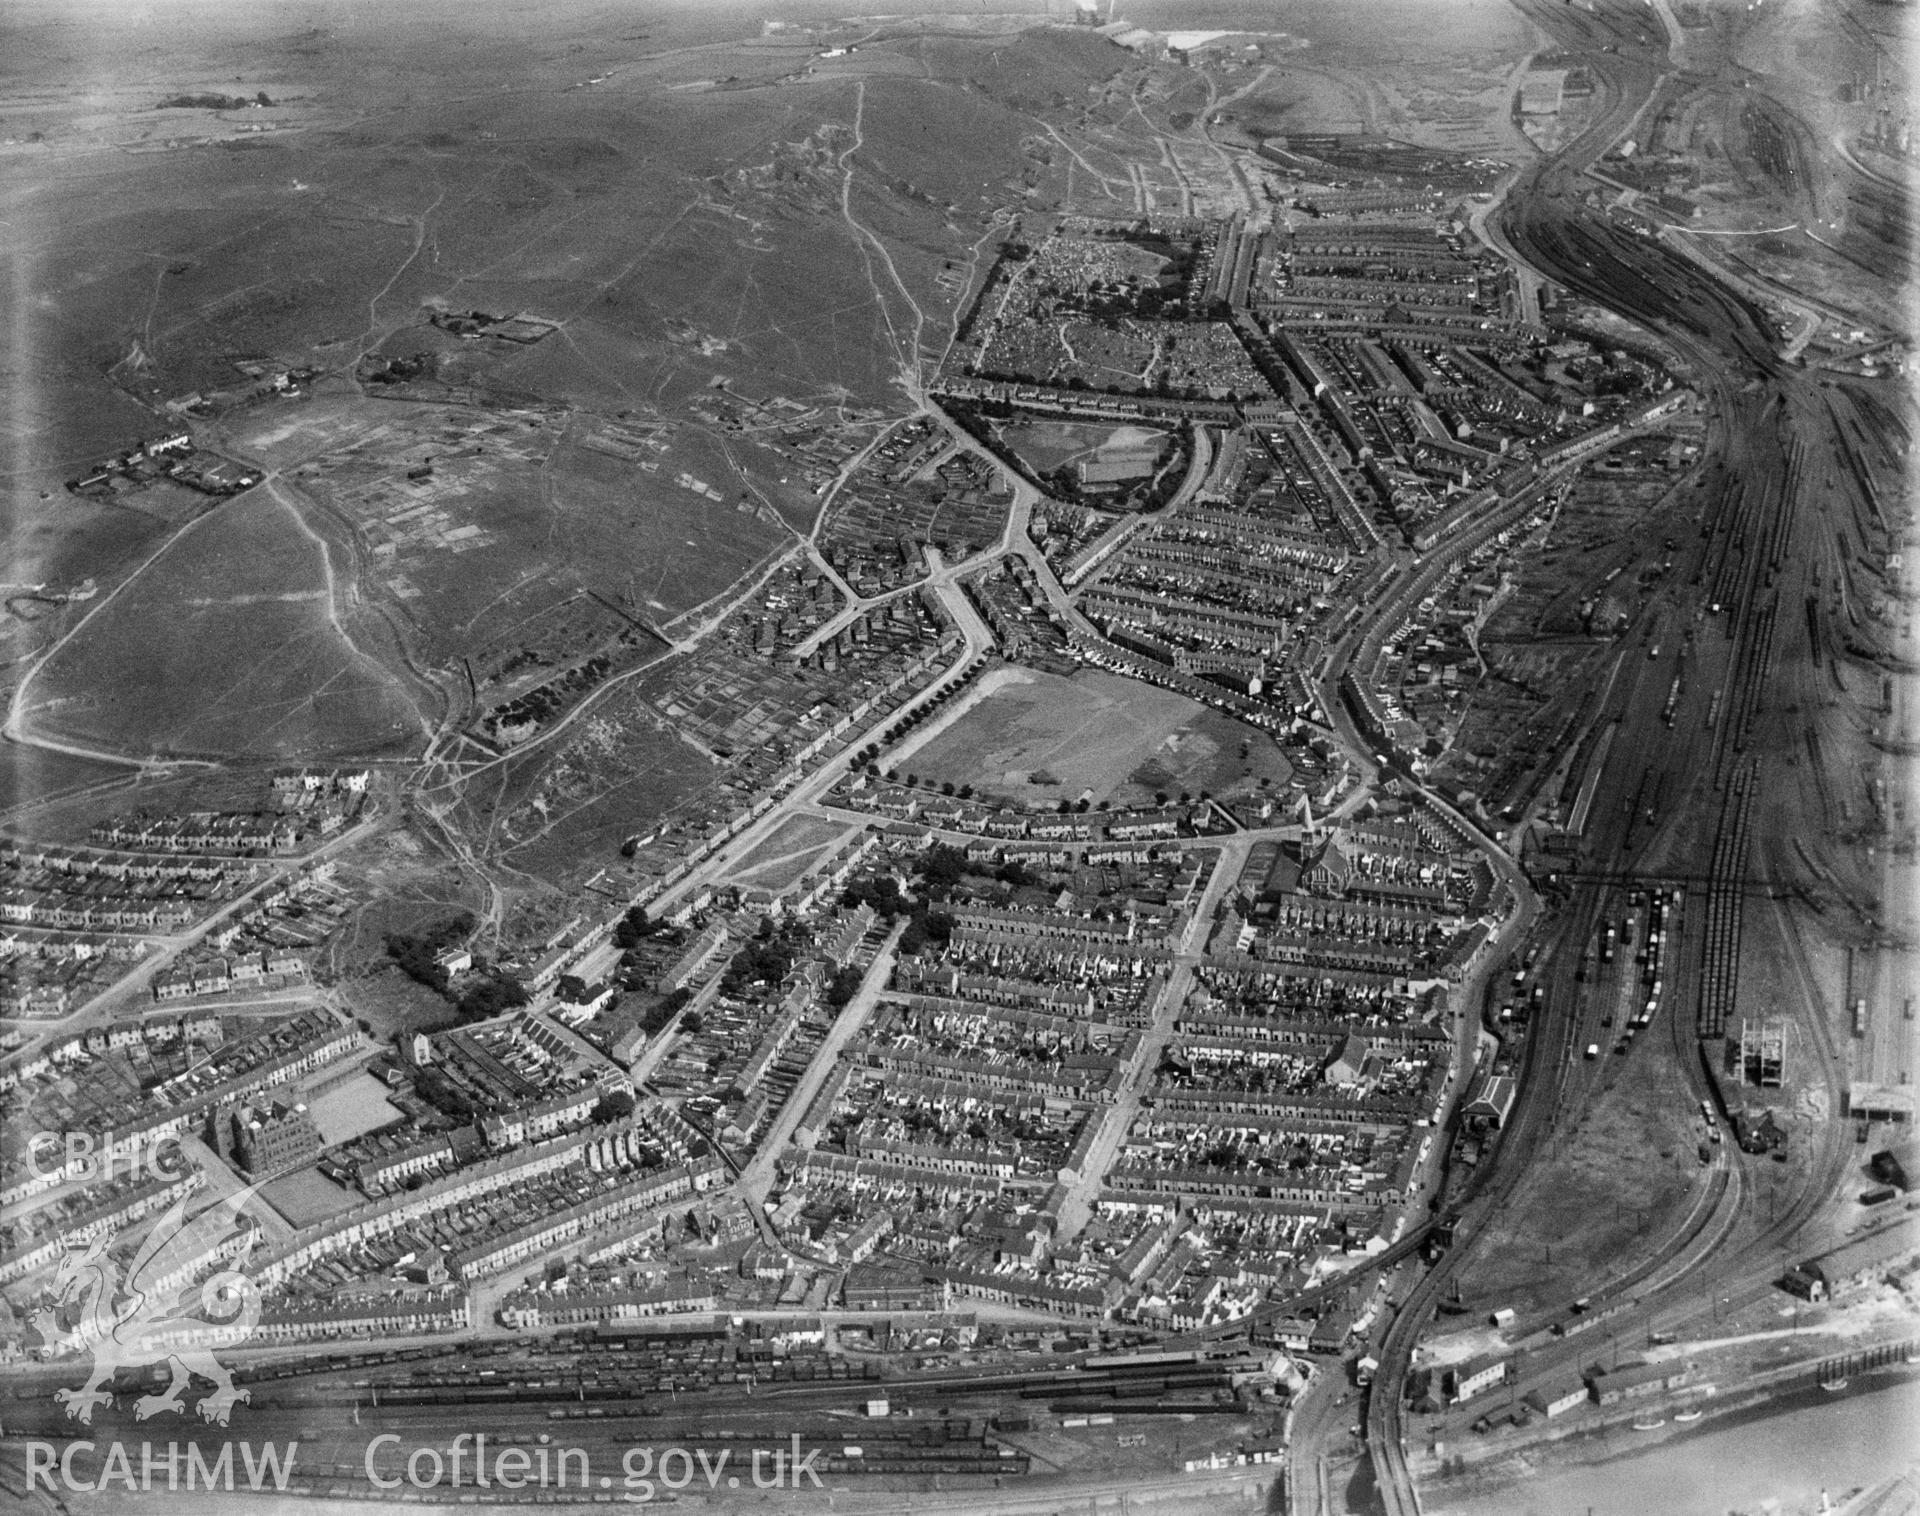 View of St Thomas and Dan-y-Graig areas of Swansea showing cemetery and Jersey Park, oblique aerial view. 5?x4? black and white glass plate negative.